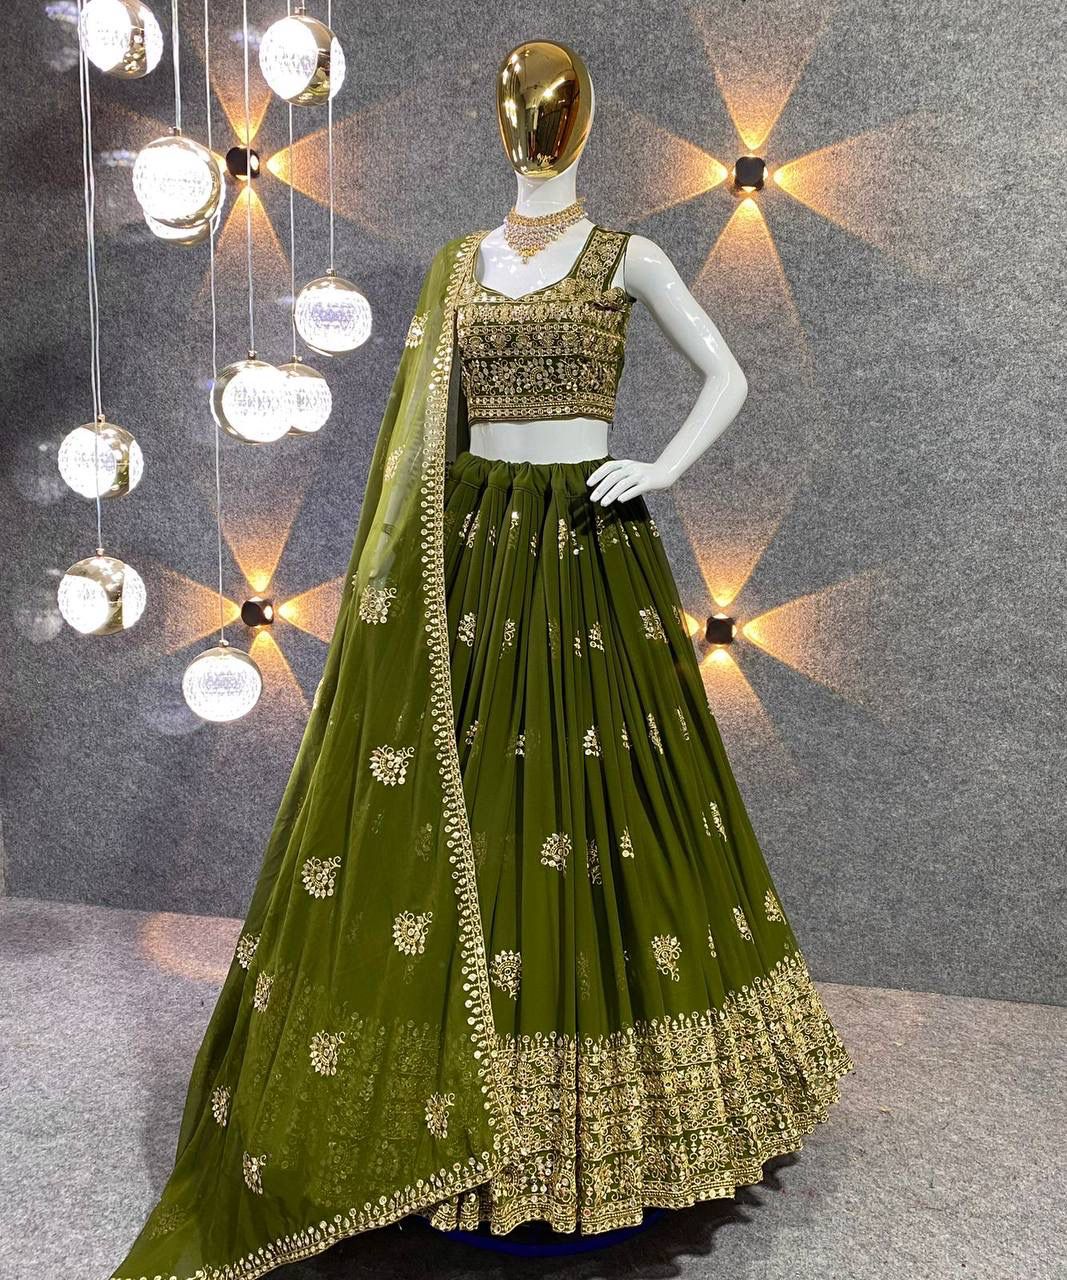 Silk Lehenga Choli has a Regular - Fit And Is Made From High-Grade Fabrics And Yarn in Chandler